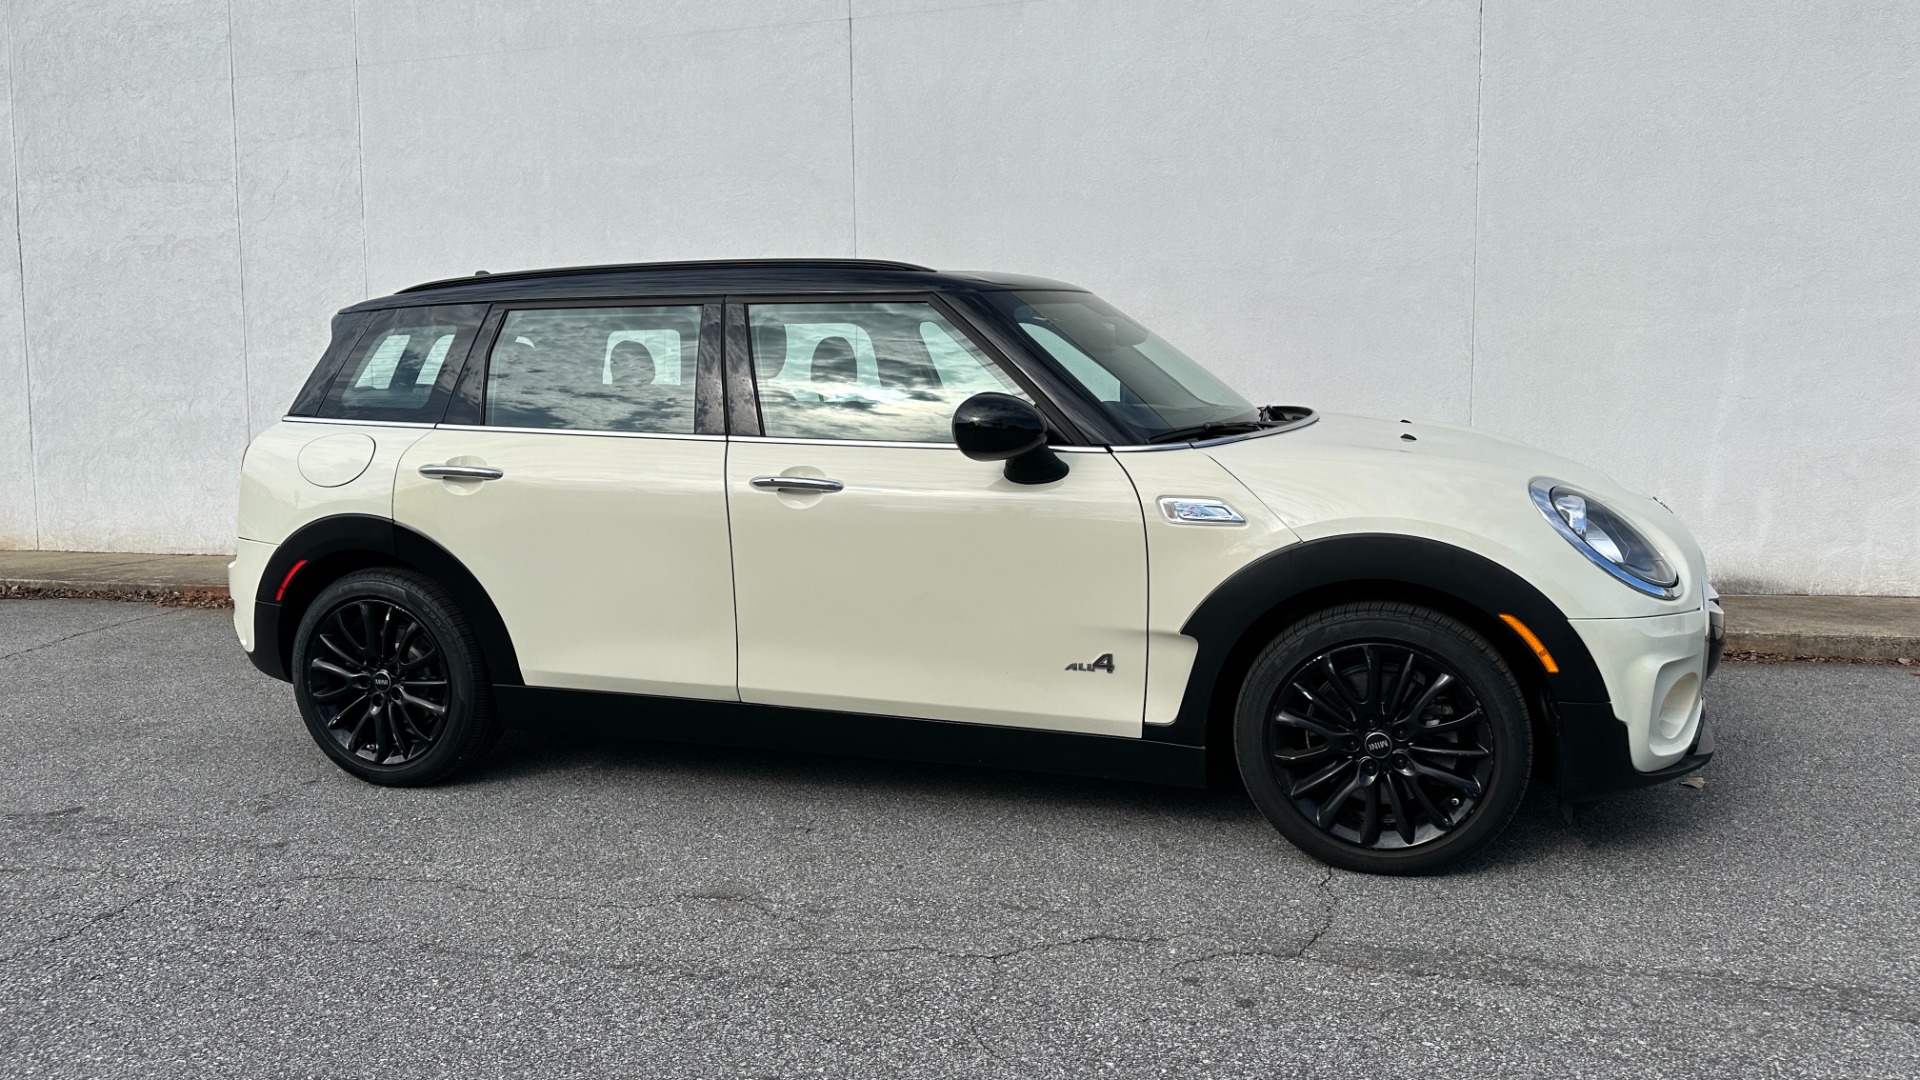 Used 2019 MINI Clubman COOPER S / NAVIGATION / ALL4 / HEATED SEATS / SPORT MODE / PADDLE SHIFTERS for sale $26,595 at Formula Imports in Charlotte NC 28227 3